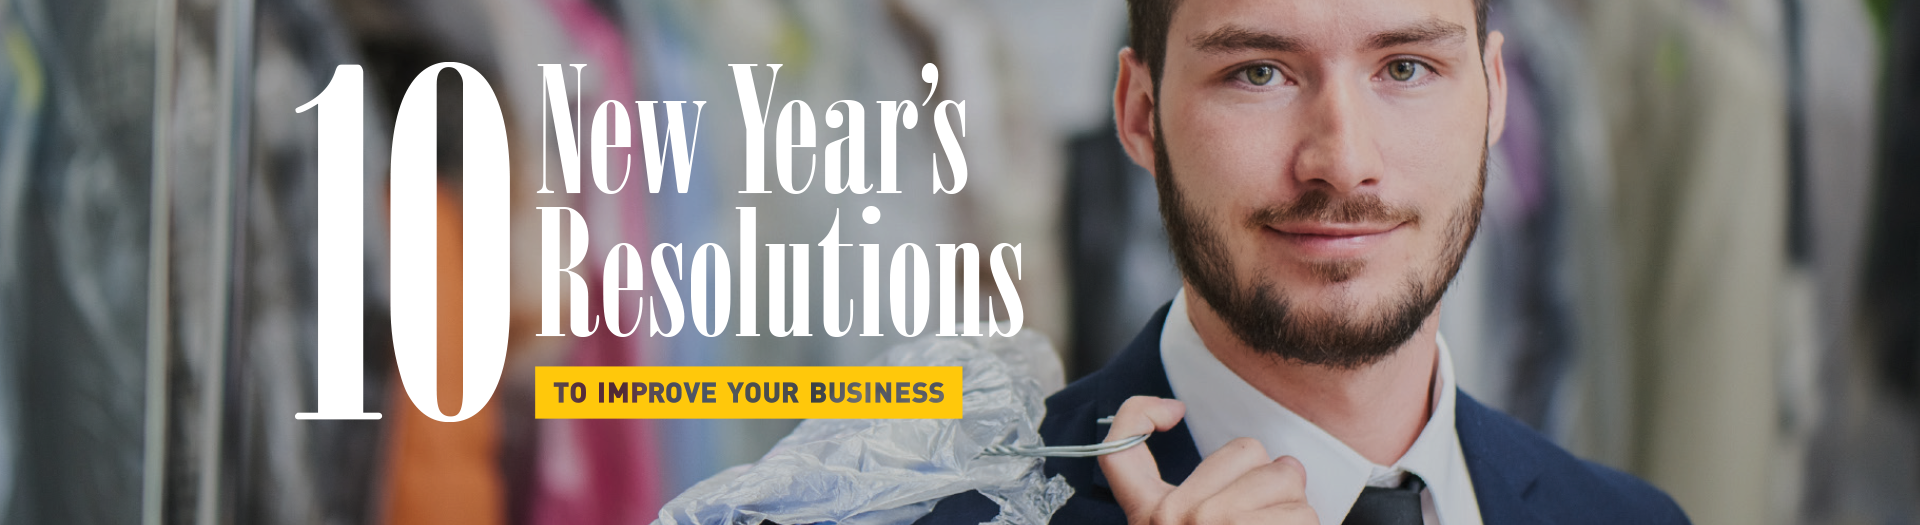 10 New Year's Resolutions for 2021 to Improve Your Business